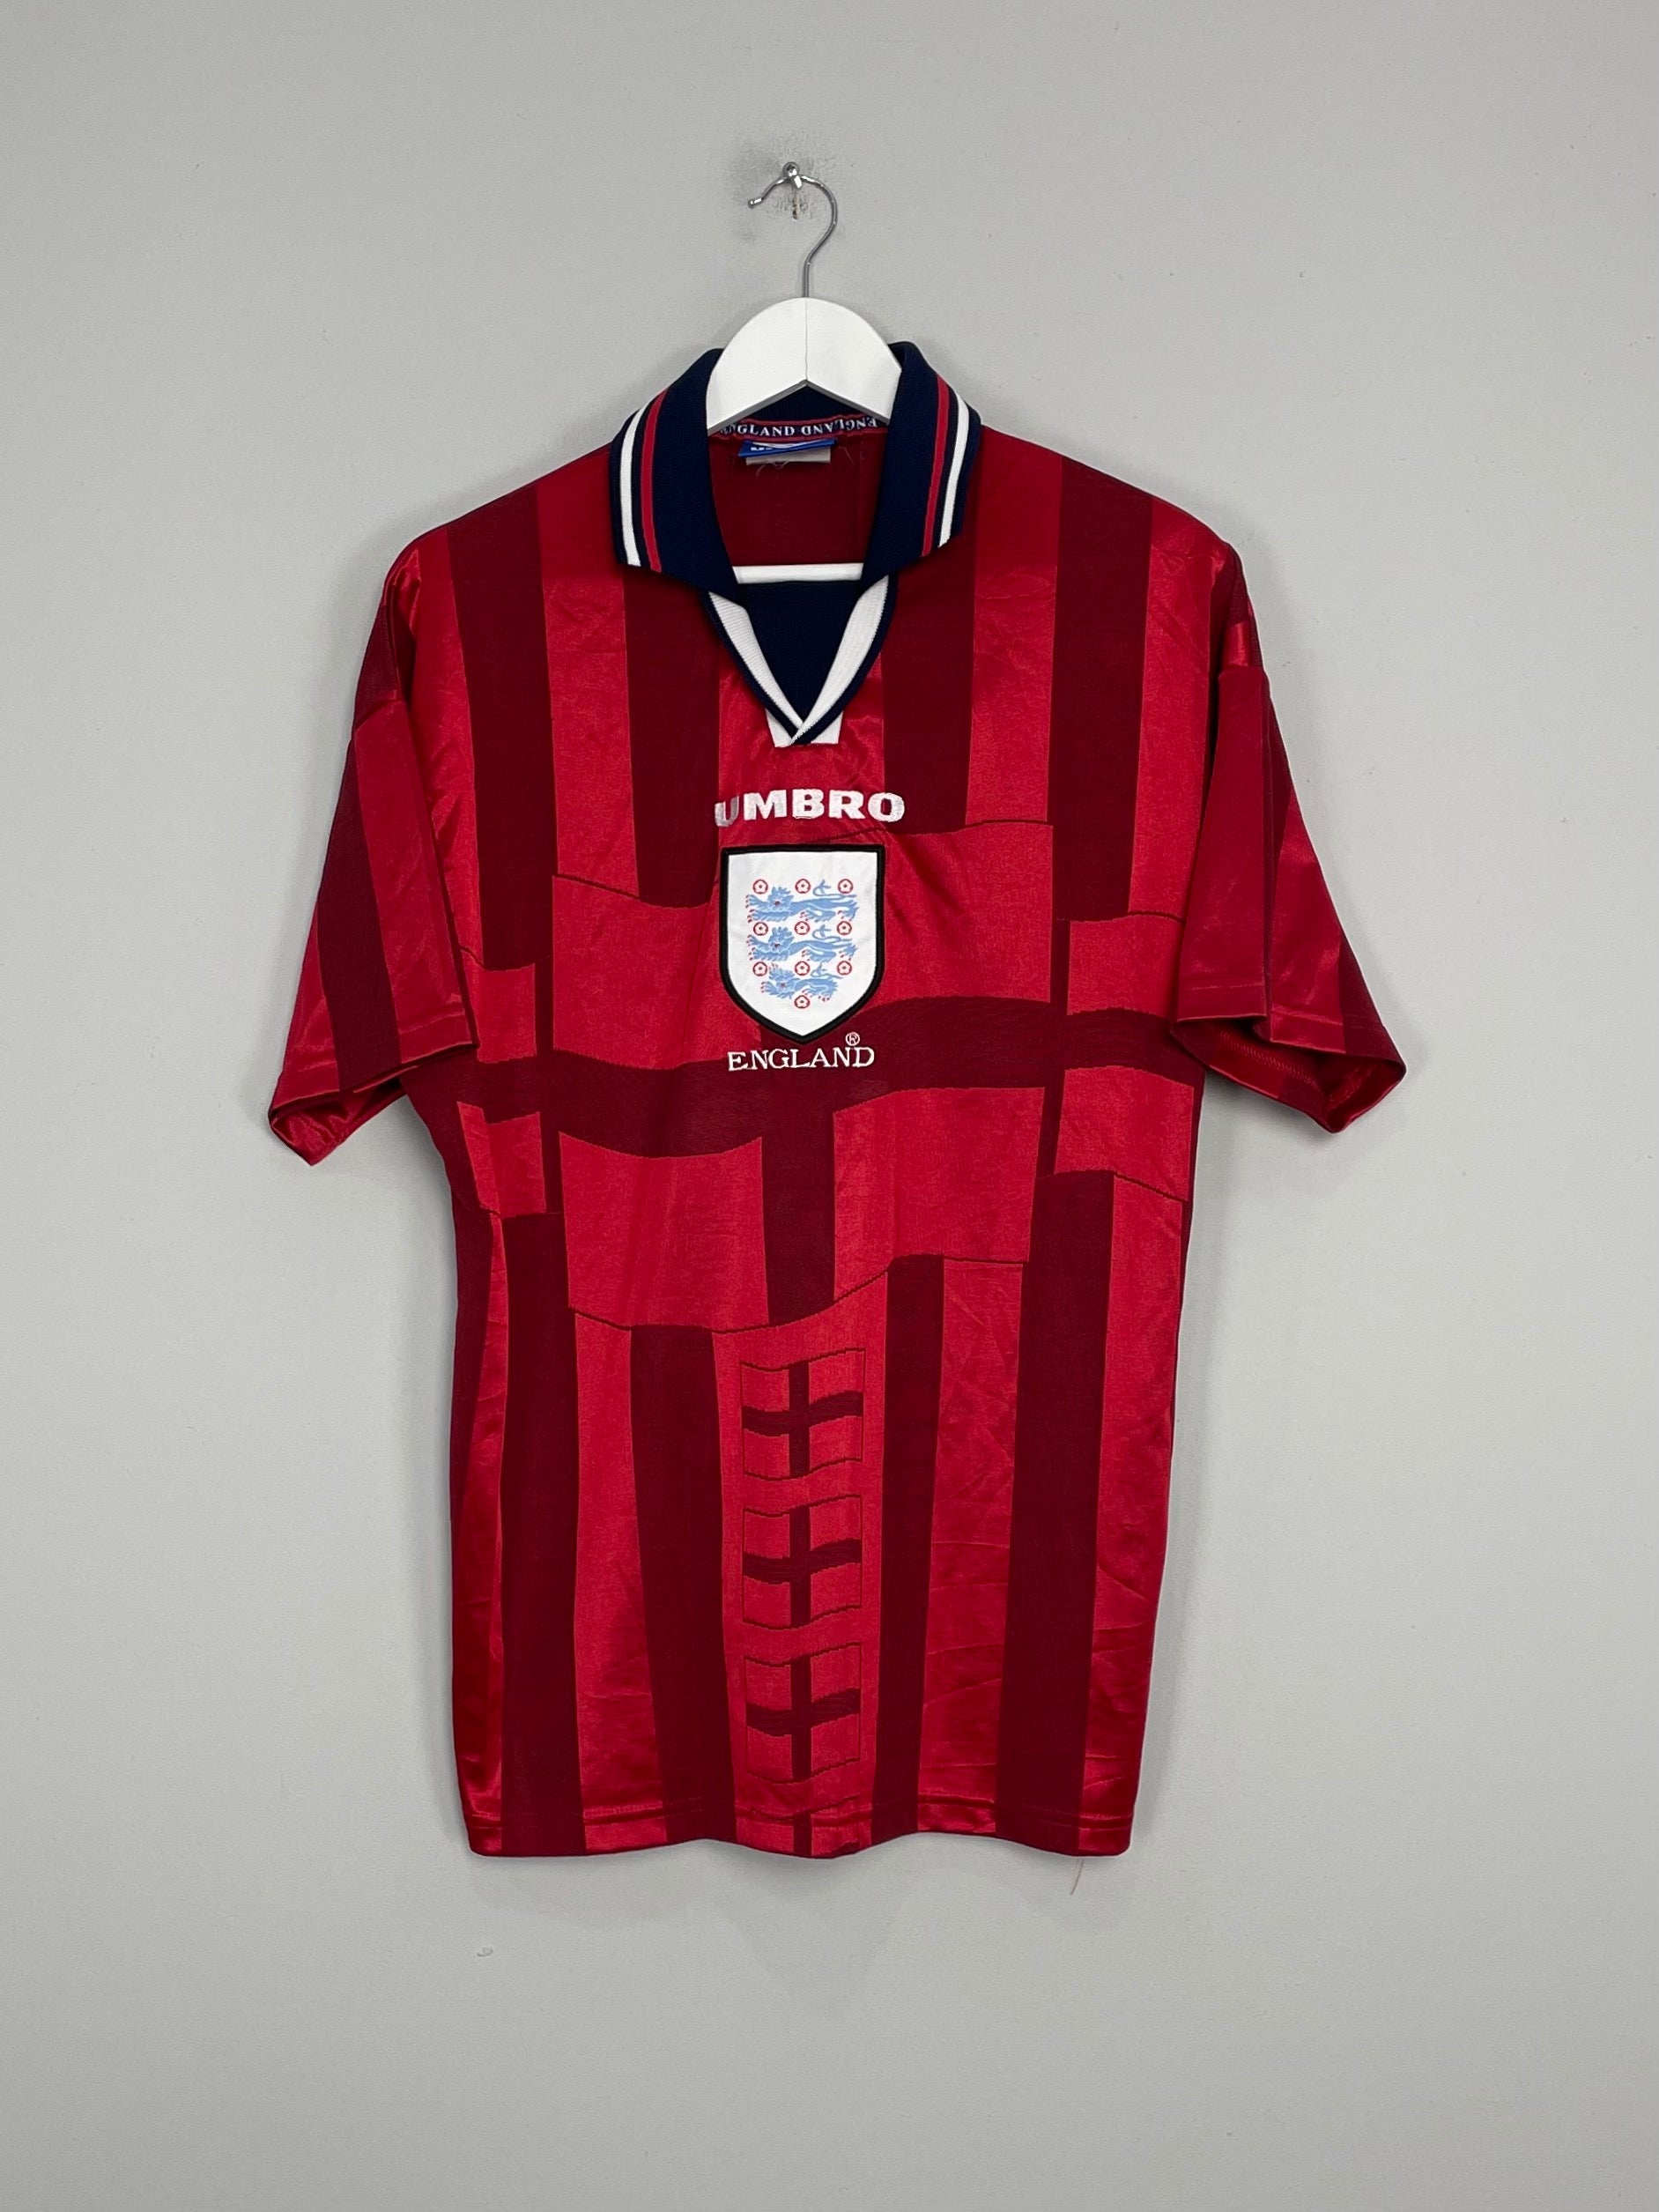 Image of the England shirt from the 1998/99 season